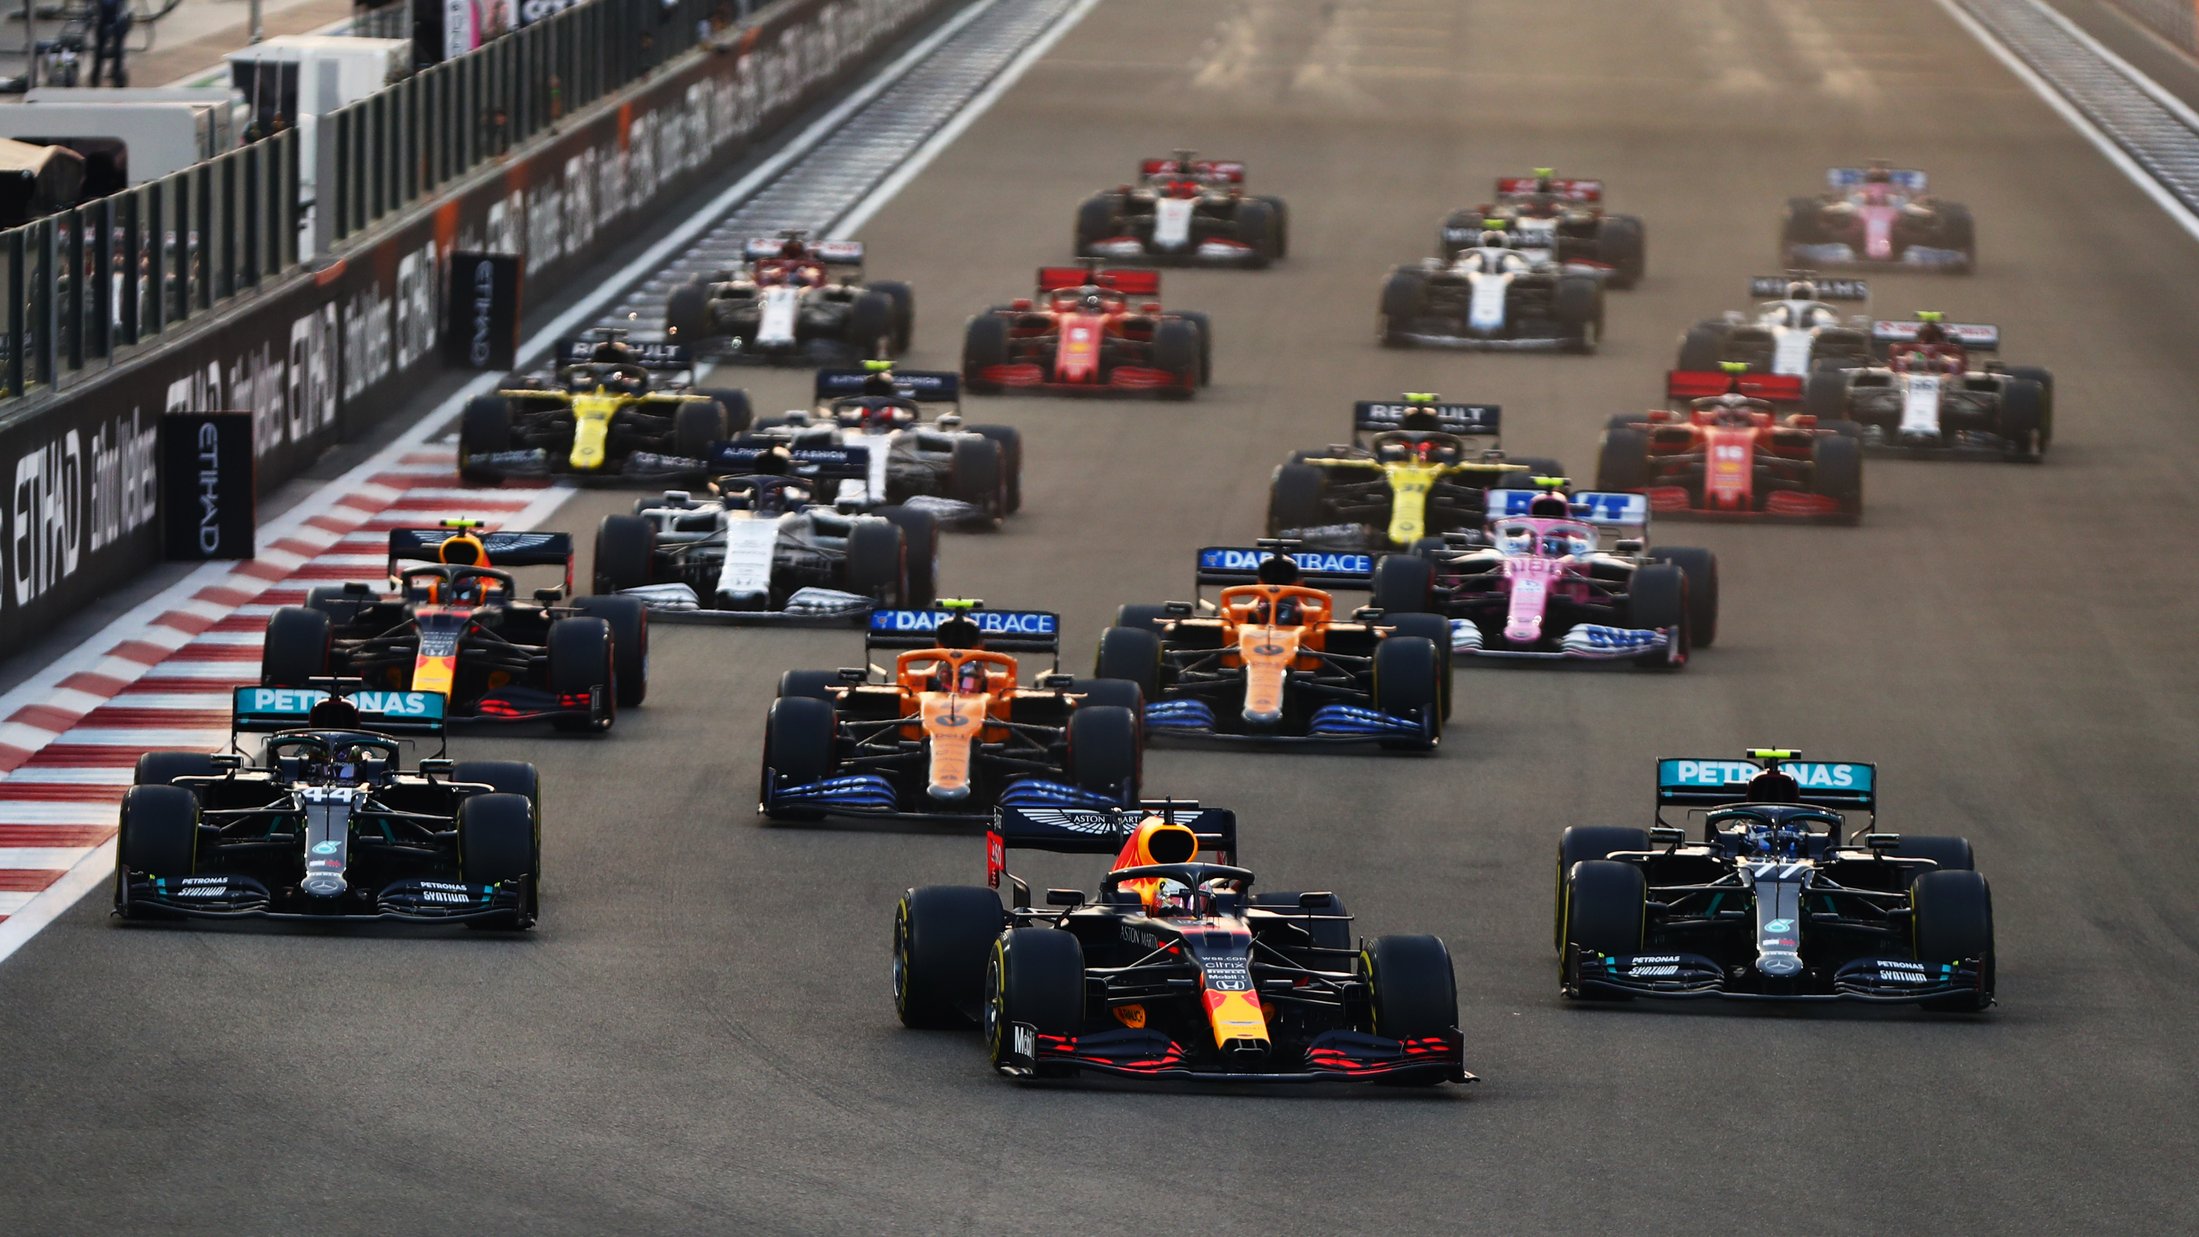 How Fast Can F1 Cars Go? Comparisons With MotoGP, IndyCAR, NASCAR and Formula E